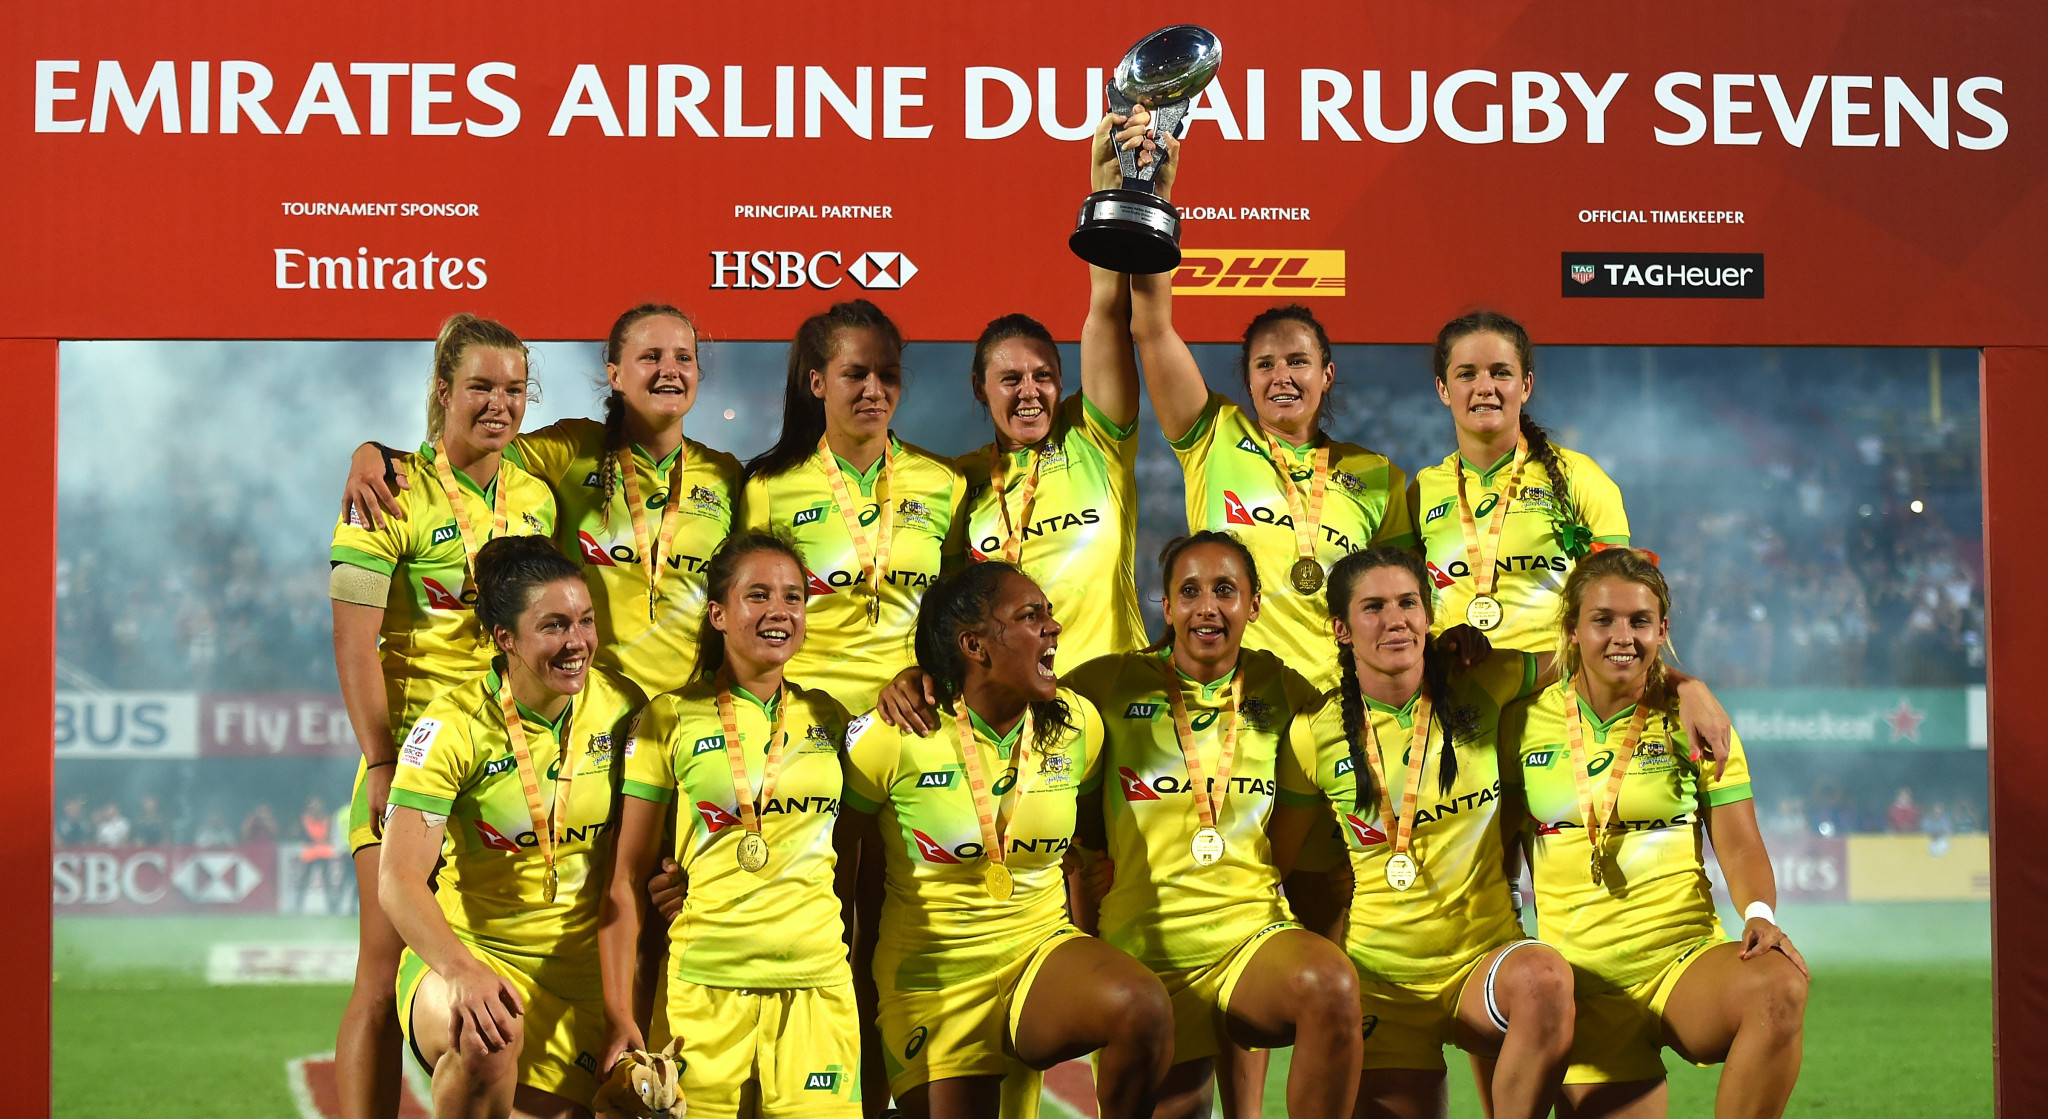 Australia won the first World Rugby Sevens Series event of the season in Dubai ©Getty Images